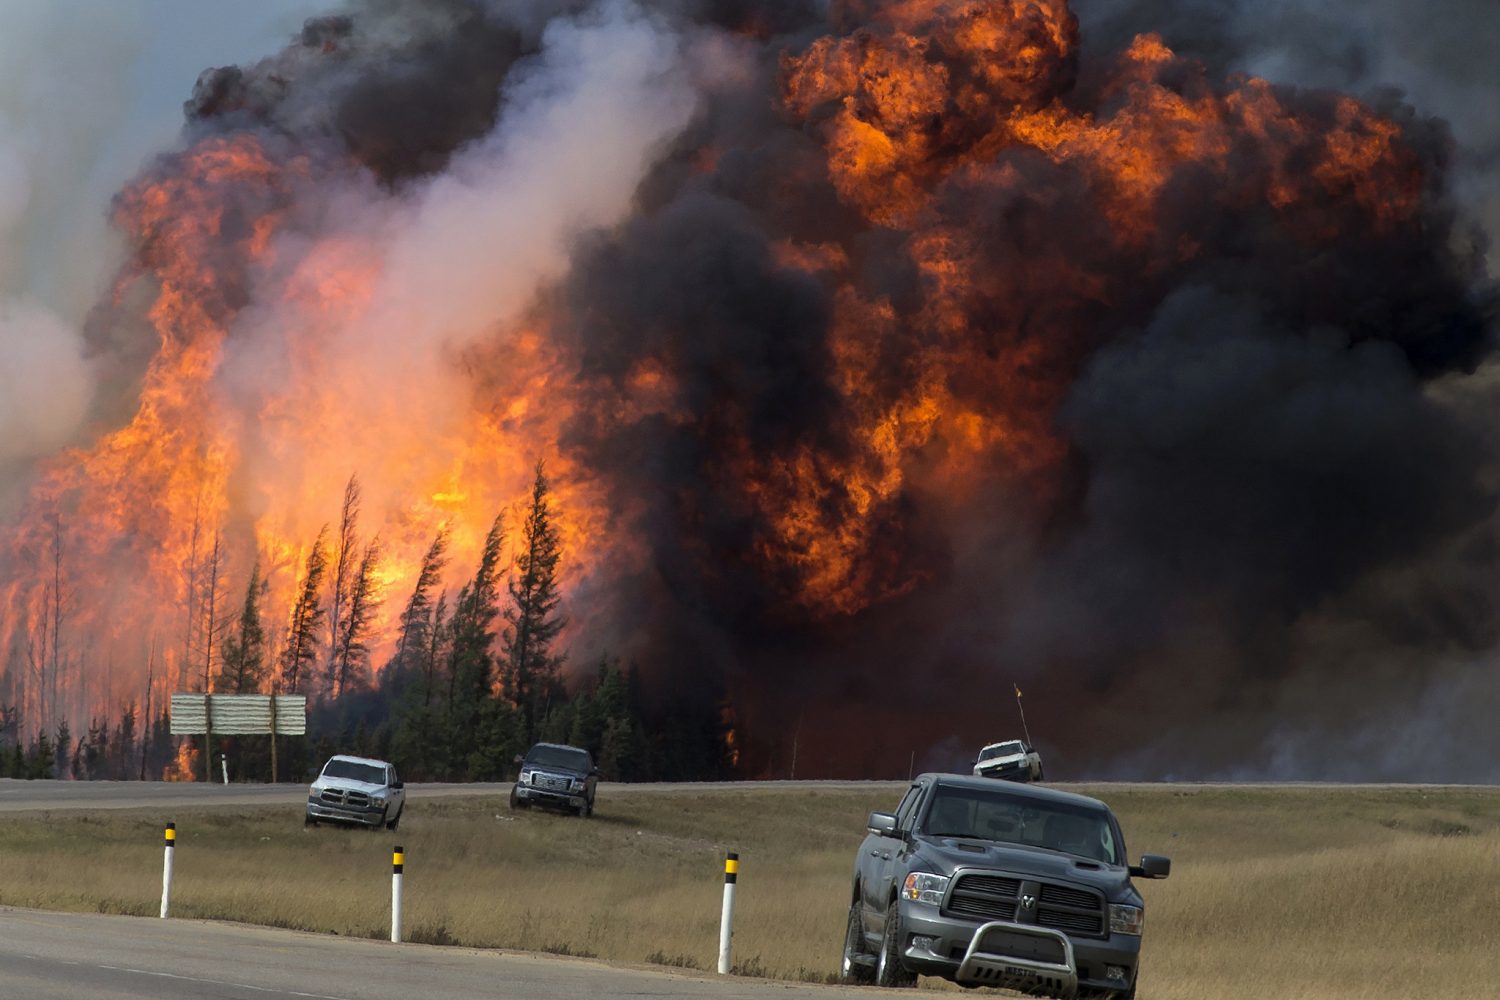 A raging wildfire consumes the forest next to Highway 63 twenty four kilometres south of Fort McMurray in May 2016. Photo courtesy Chris Schwarz/Government of Alberta.